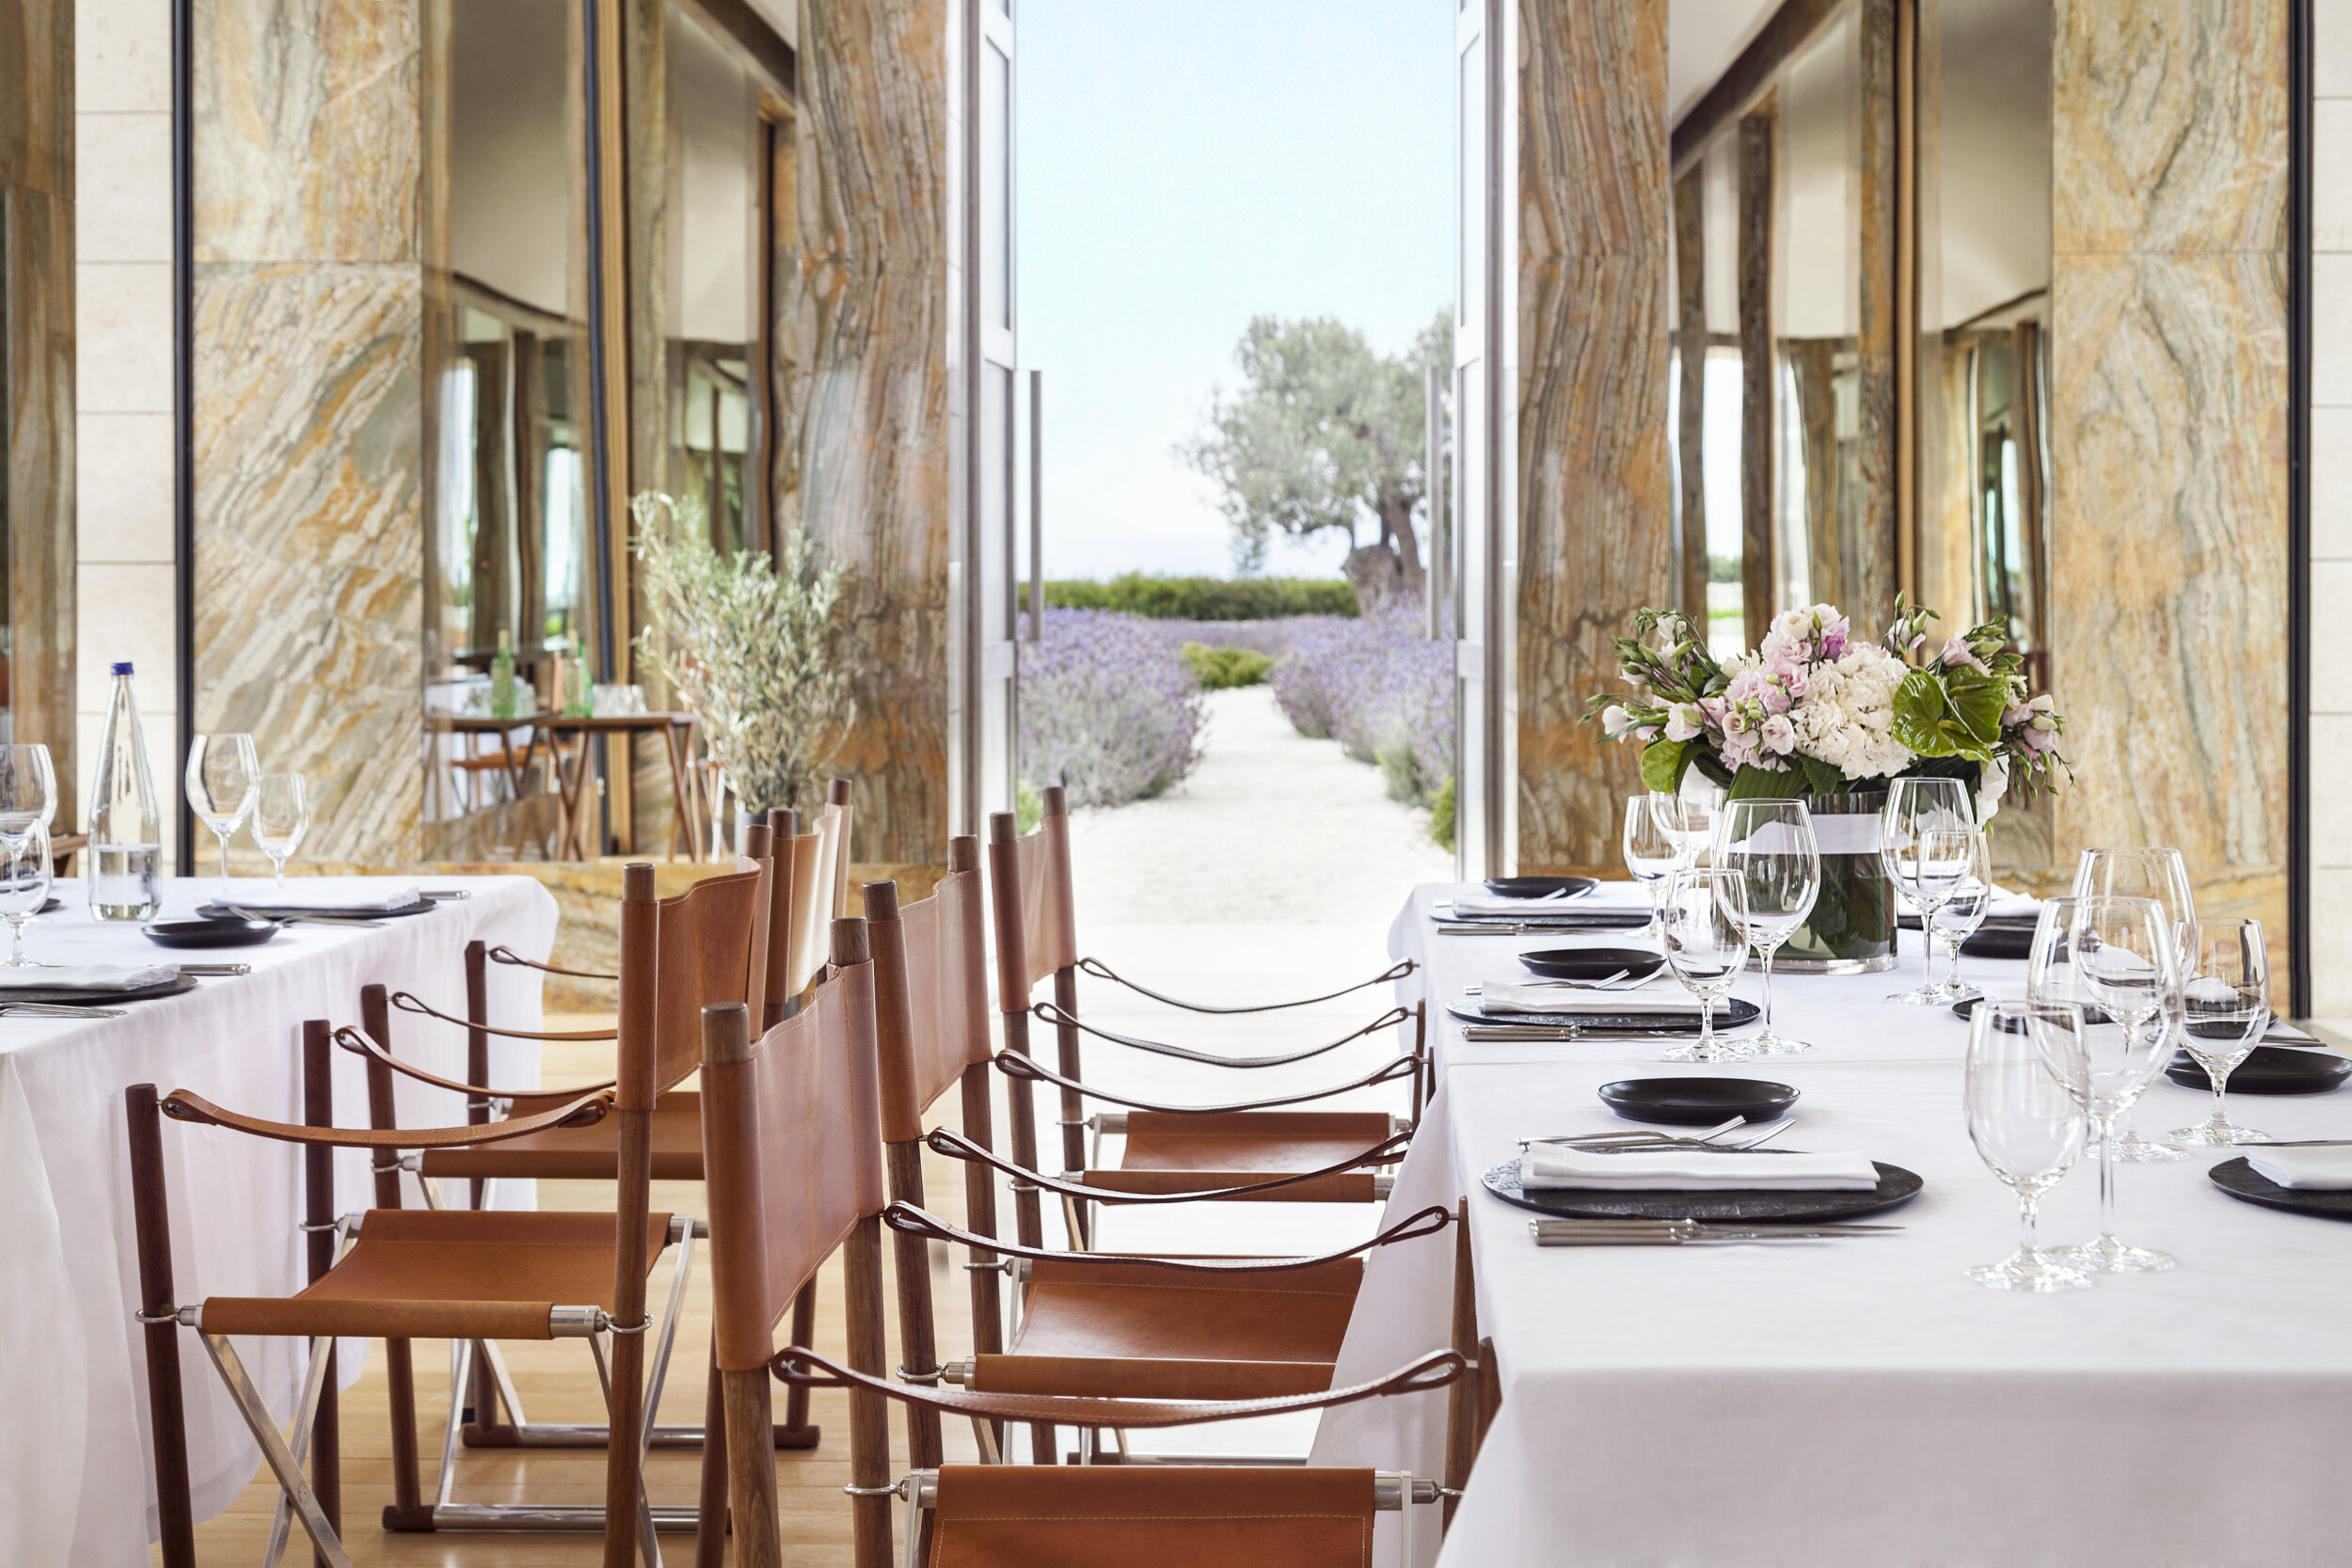 Amanzoe, Greece - Celebrations & Events, Meeting room, Dining_High Res_6717.jpg